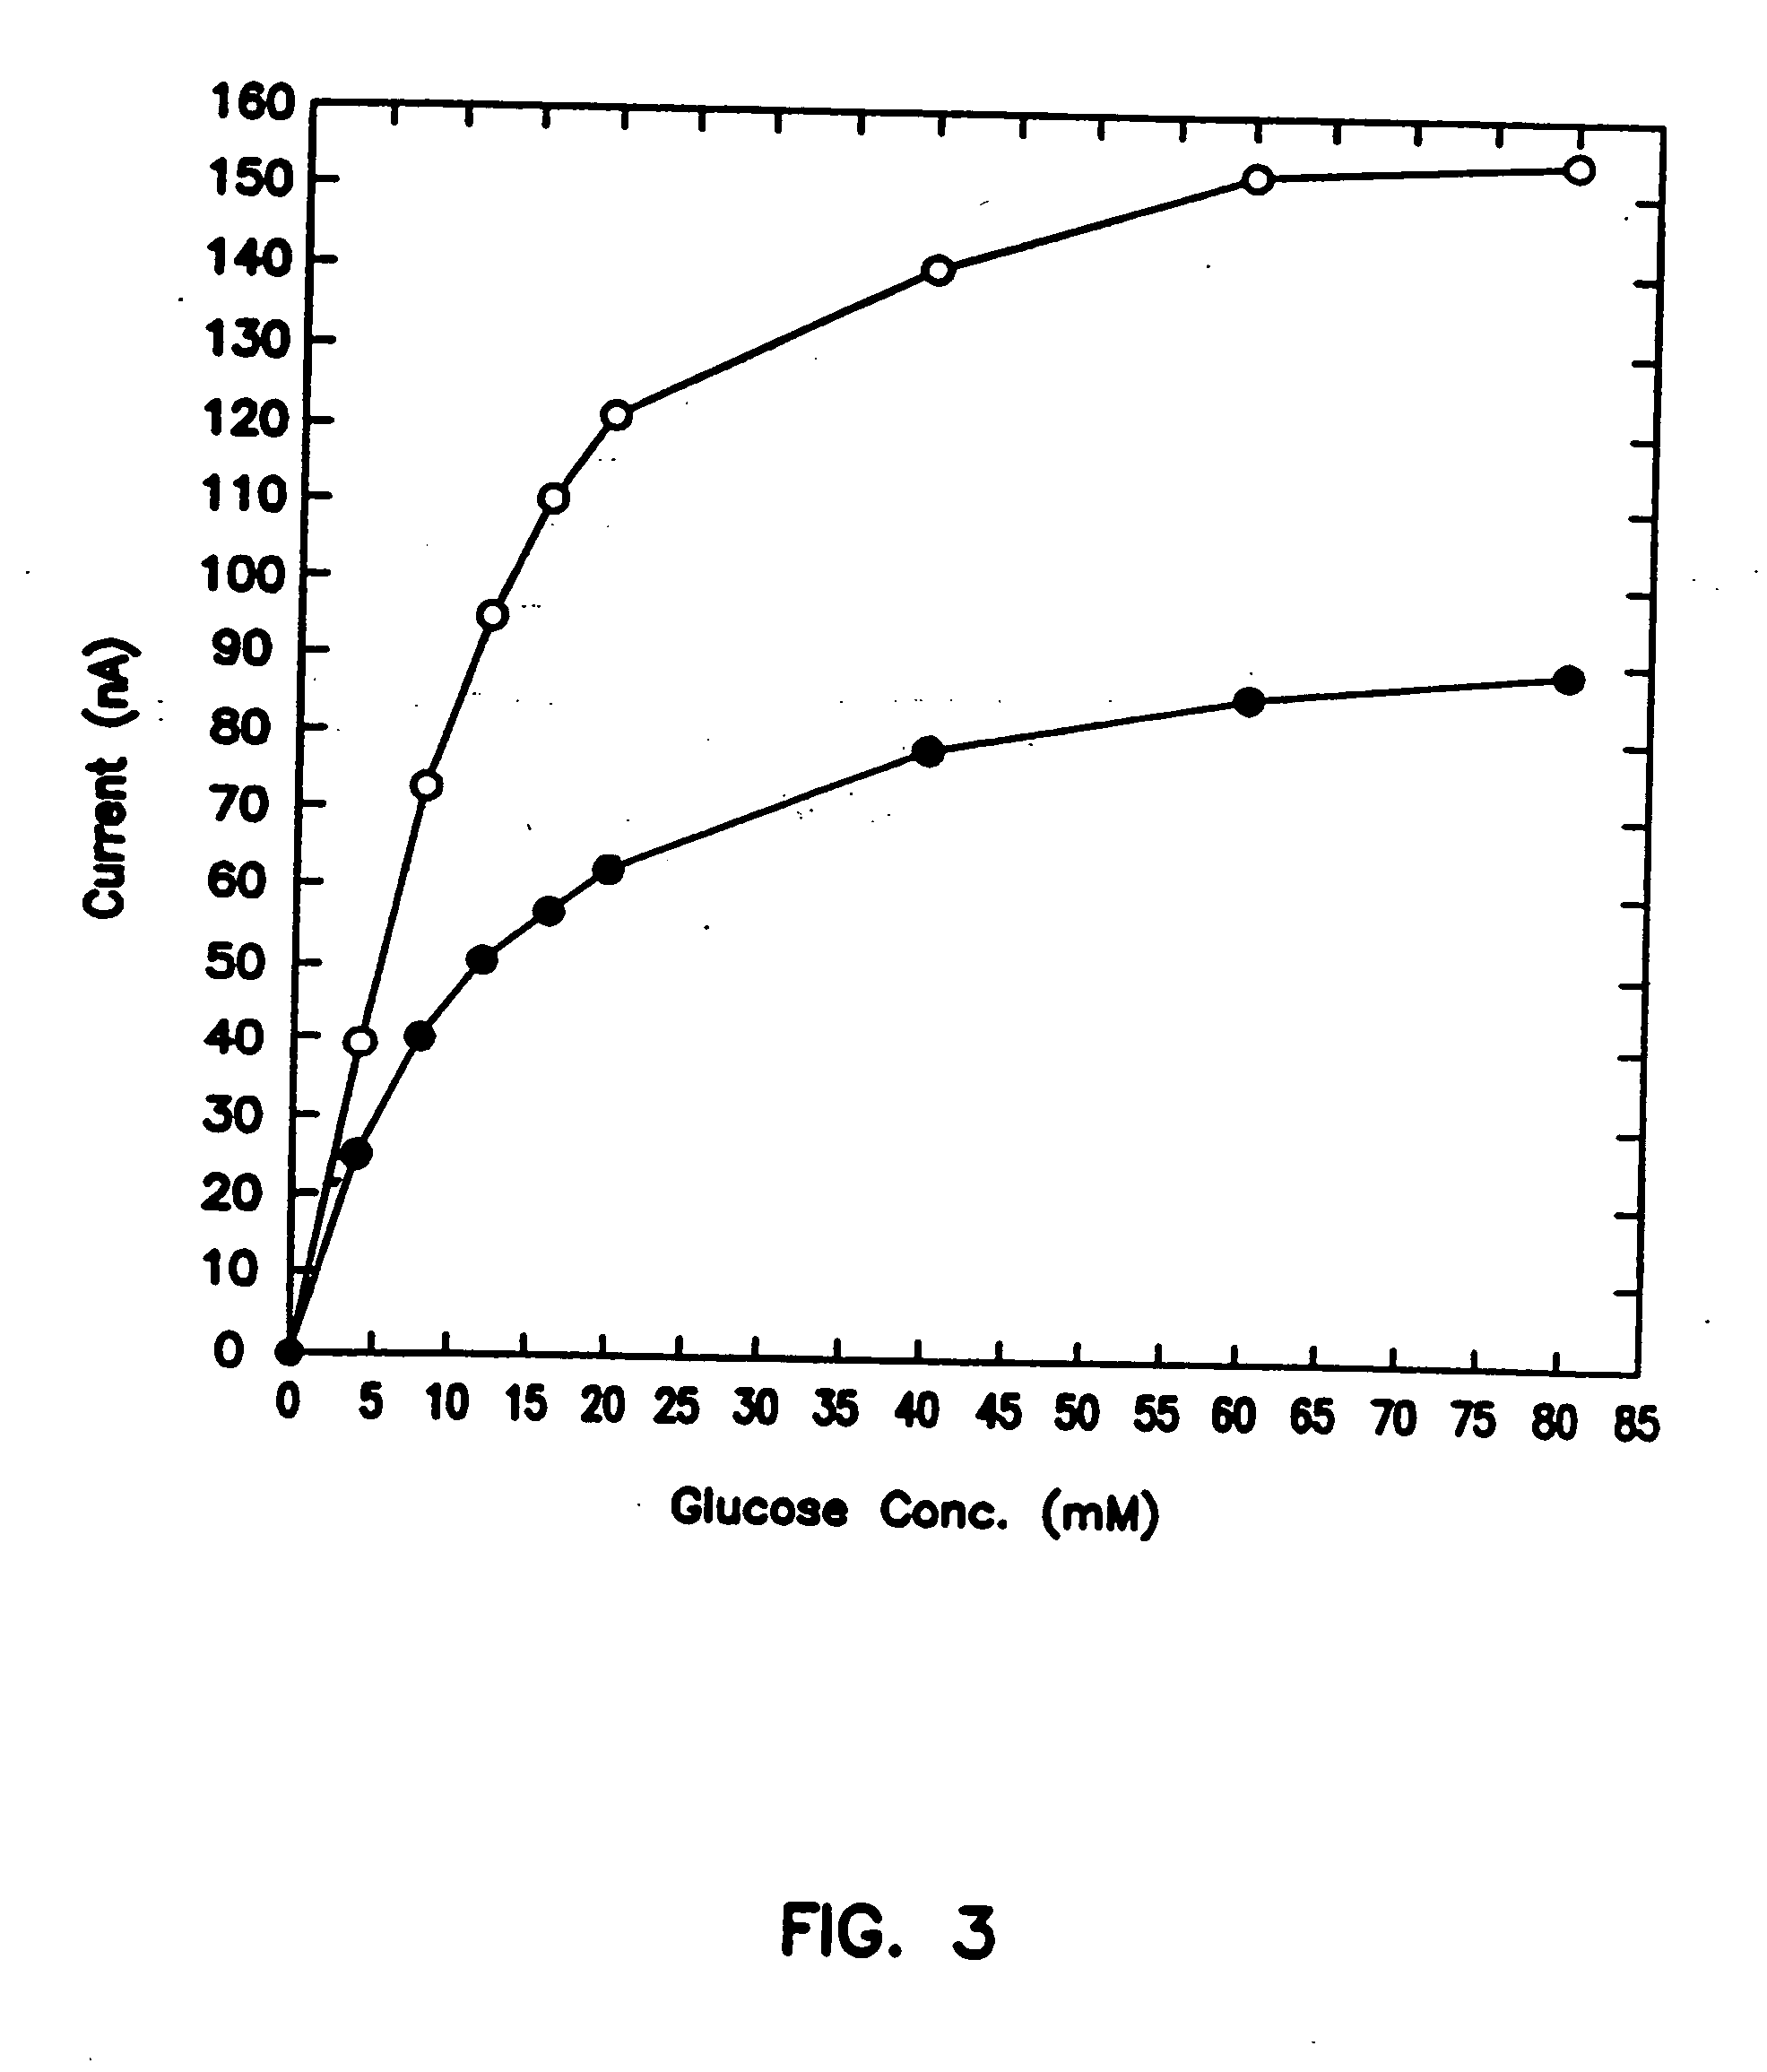 Method of determining analyte level using subcutaneous electrode